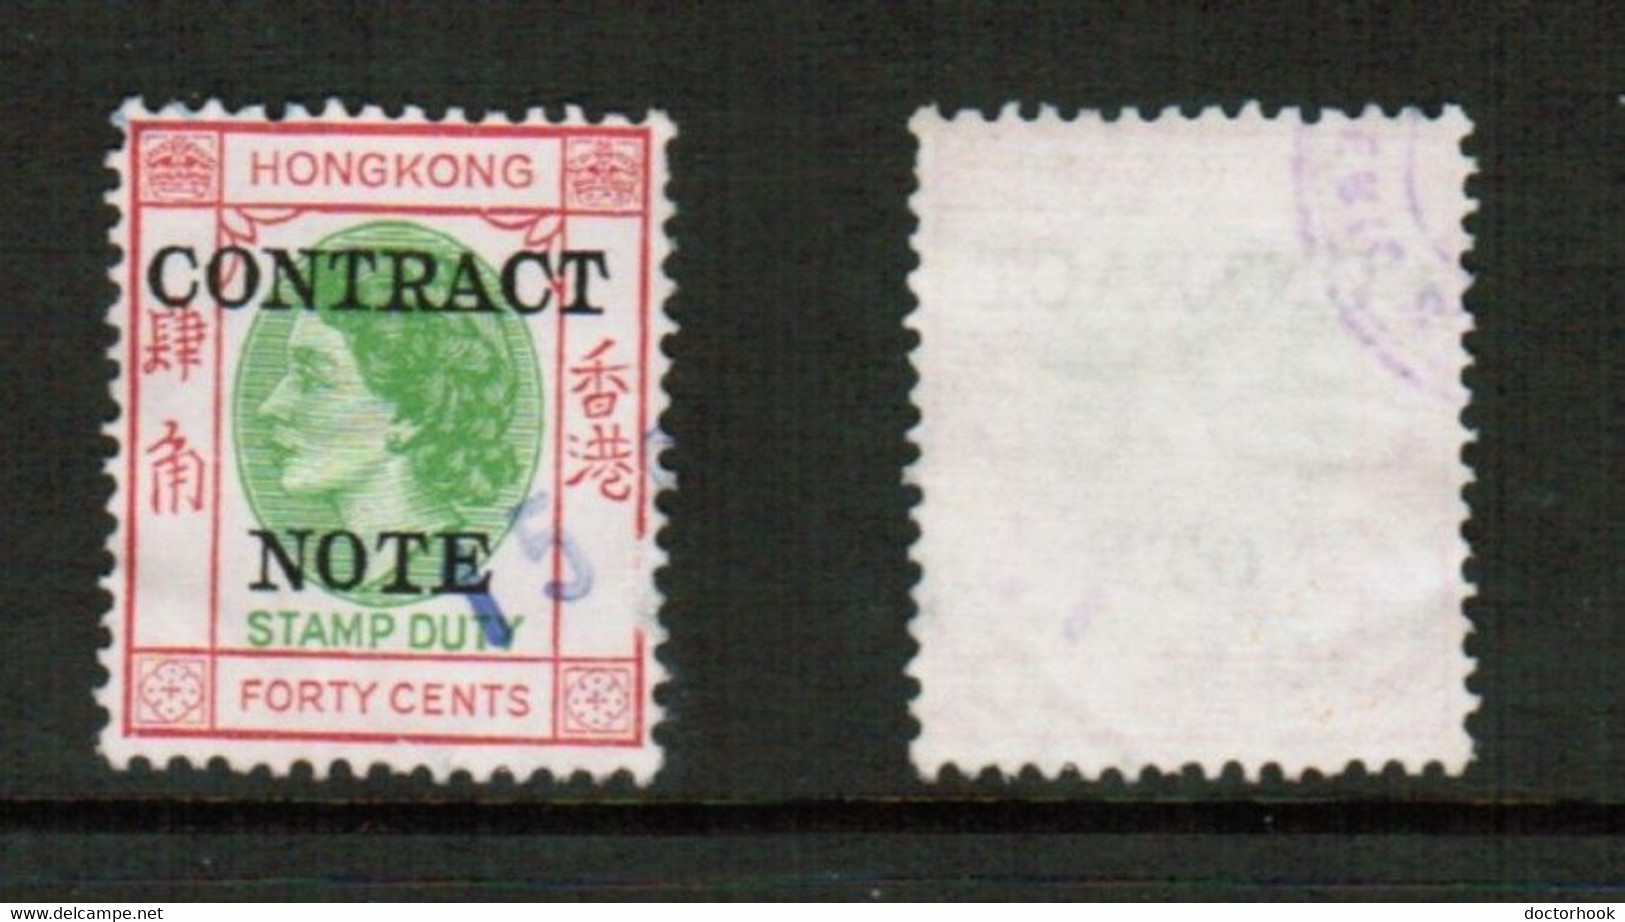 HONG KONG   40 CENT CONTRACT NOTE FISCAL USED THIN (CONDITION AS PER SCAN) (Stamp Scan # 828-10) - Francobollo Fiscali Postali